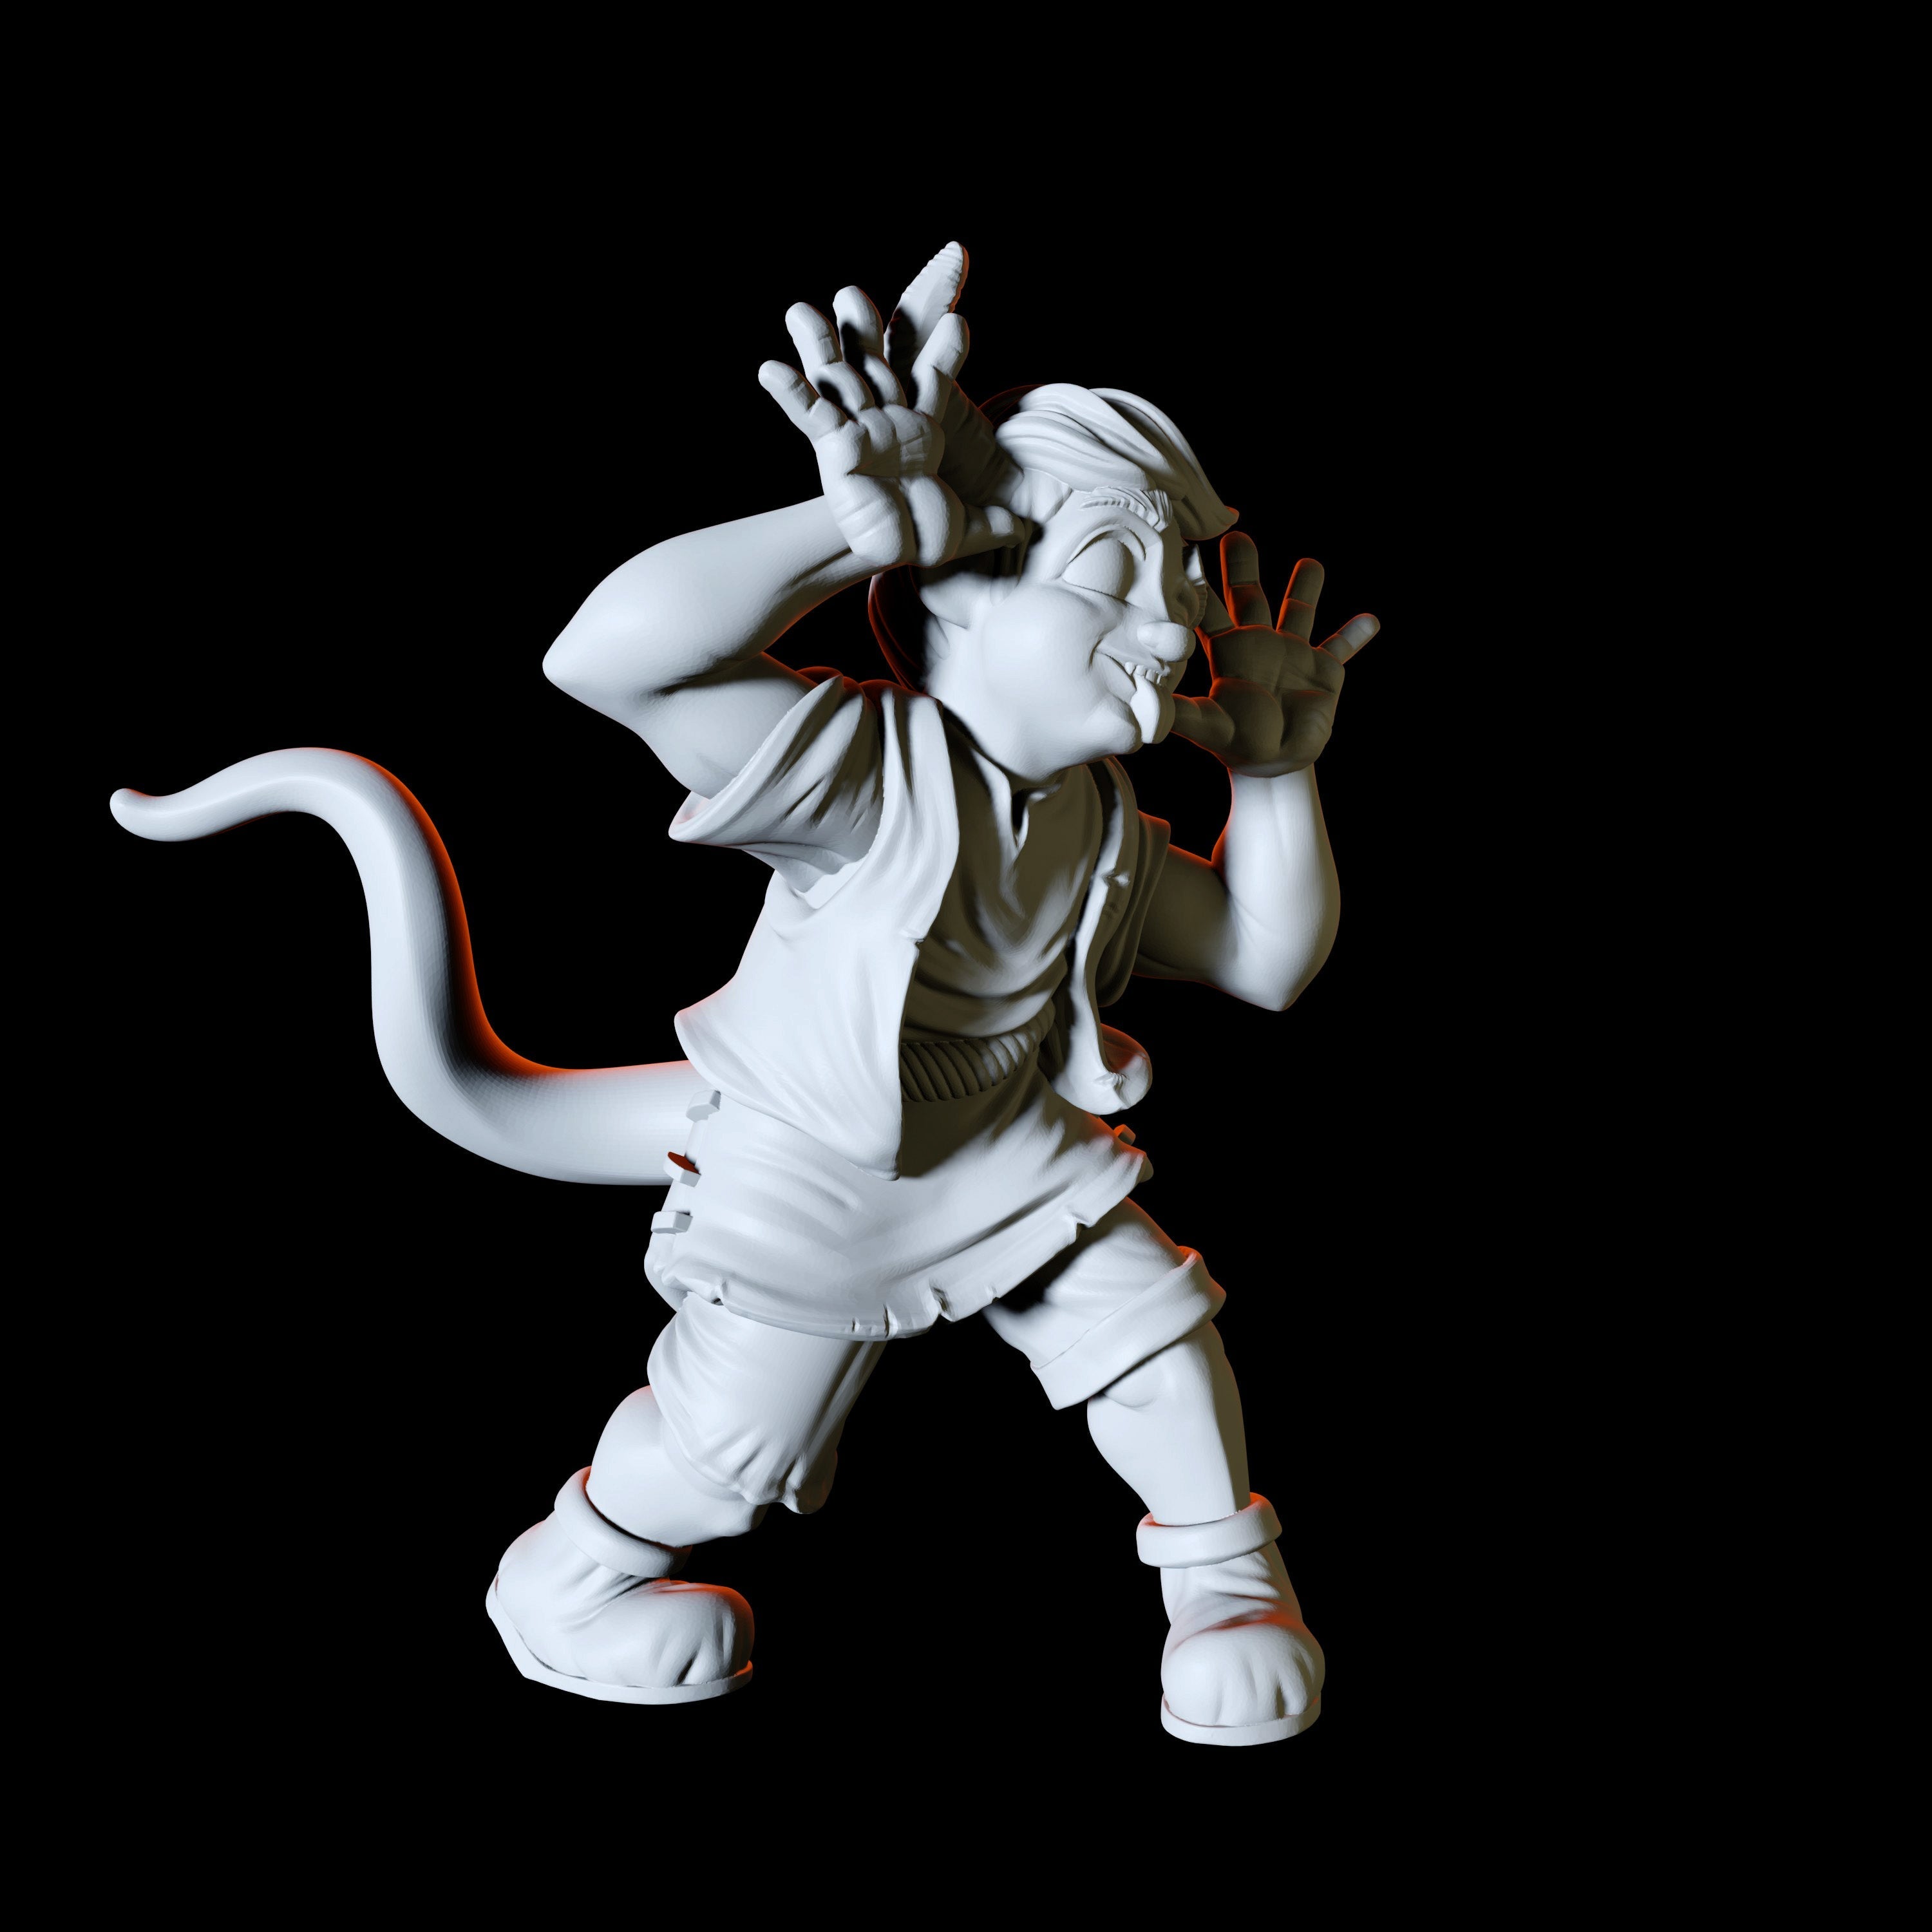 Tiefling Child Miniature for Dungeons and Dragons - Myth Forged